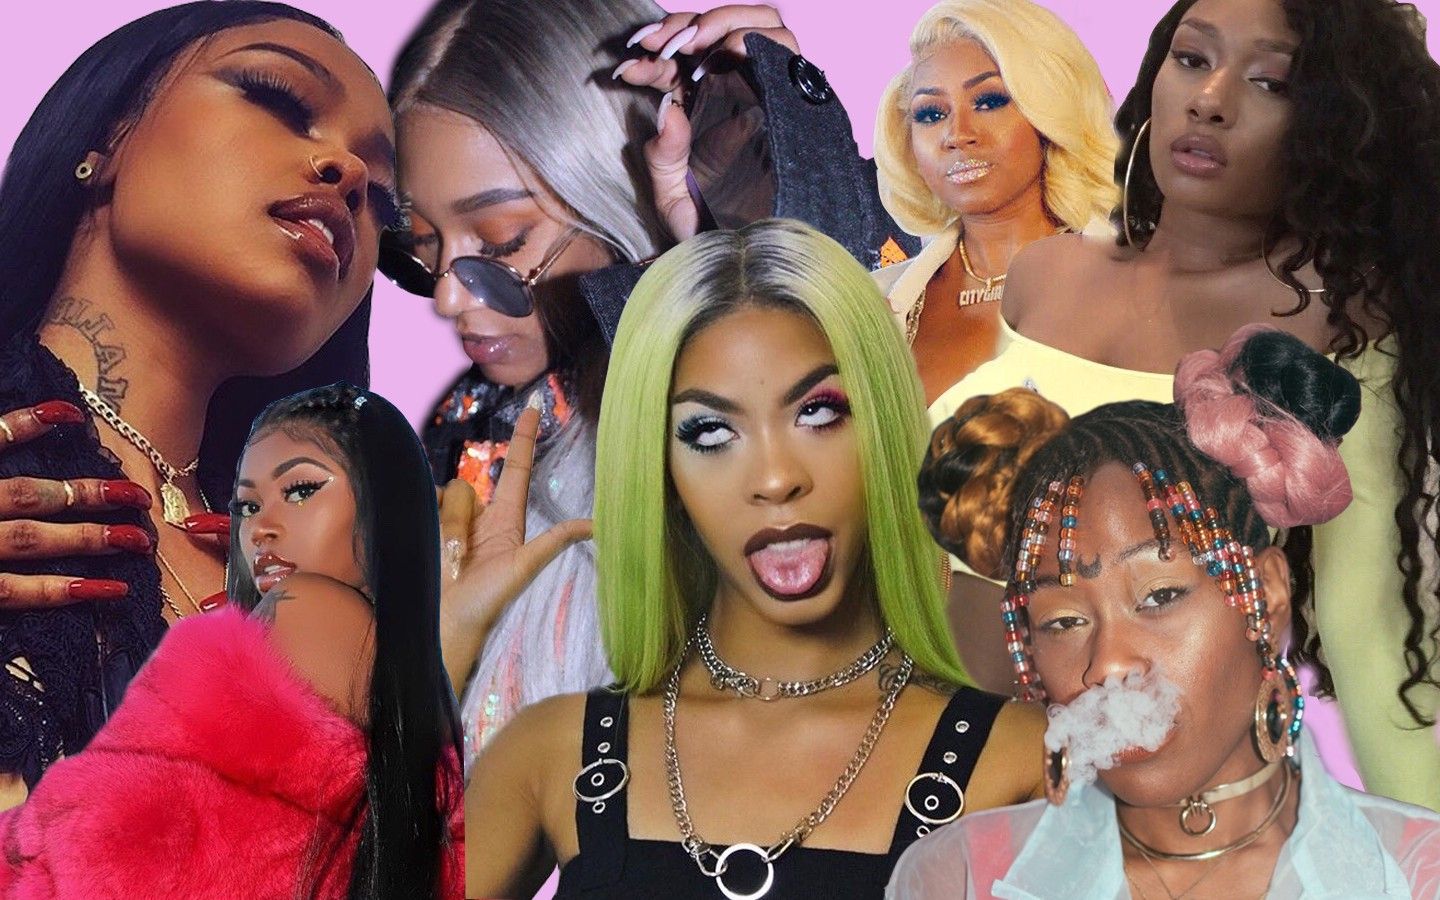 Female Rappers to Look Out For